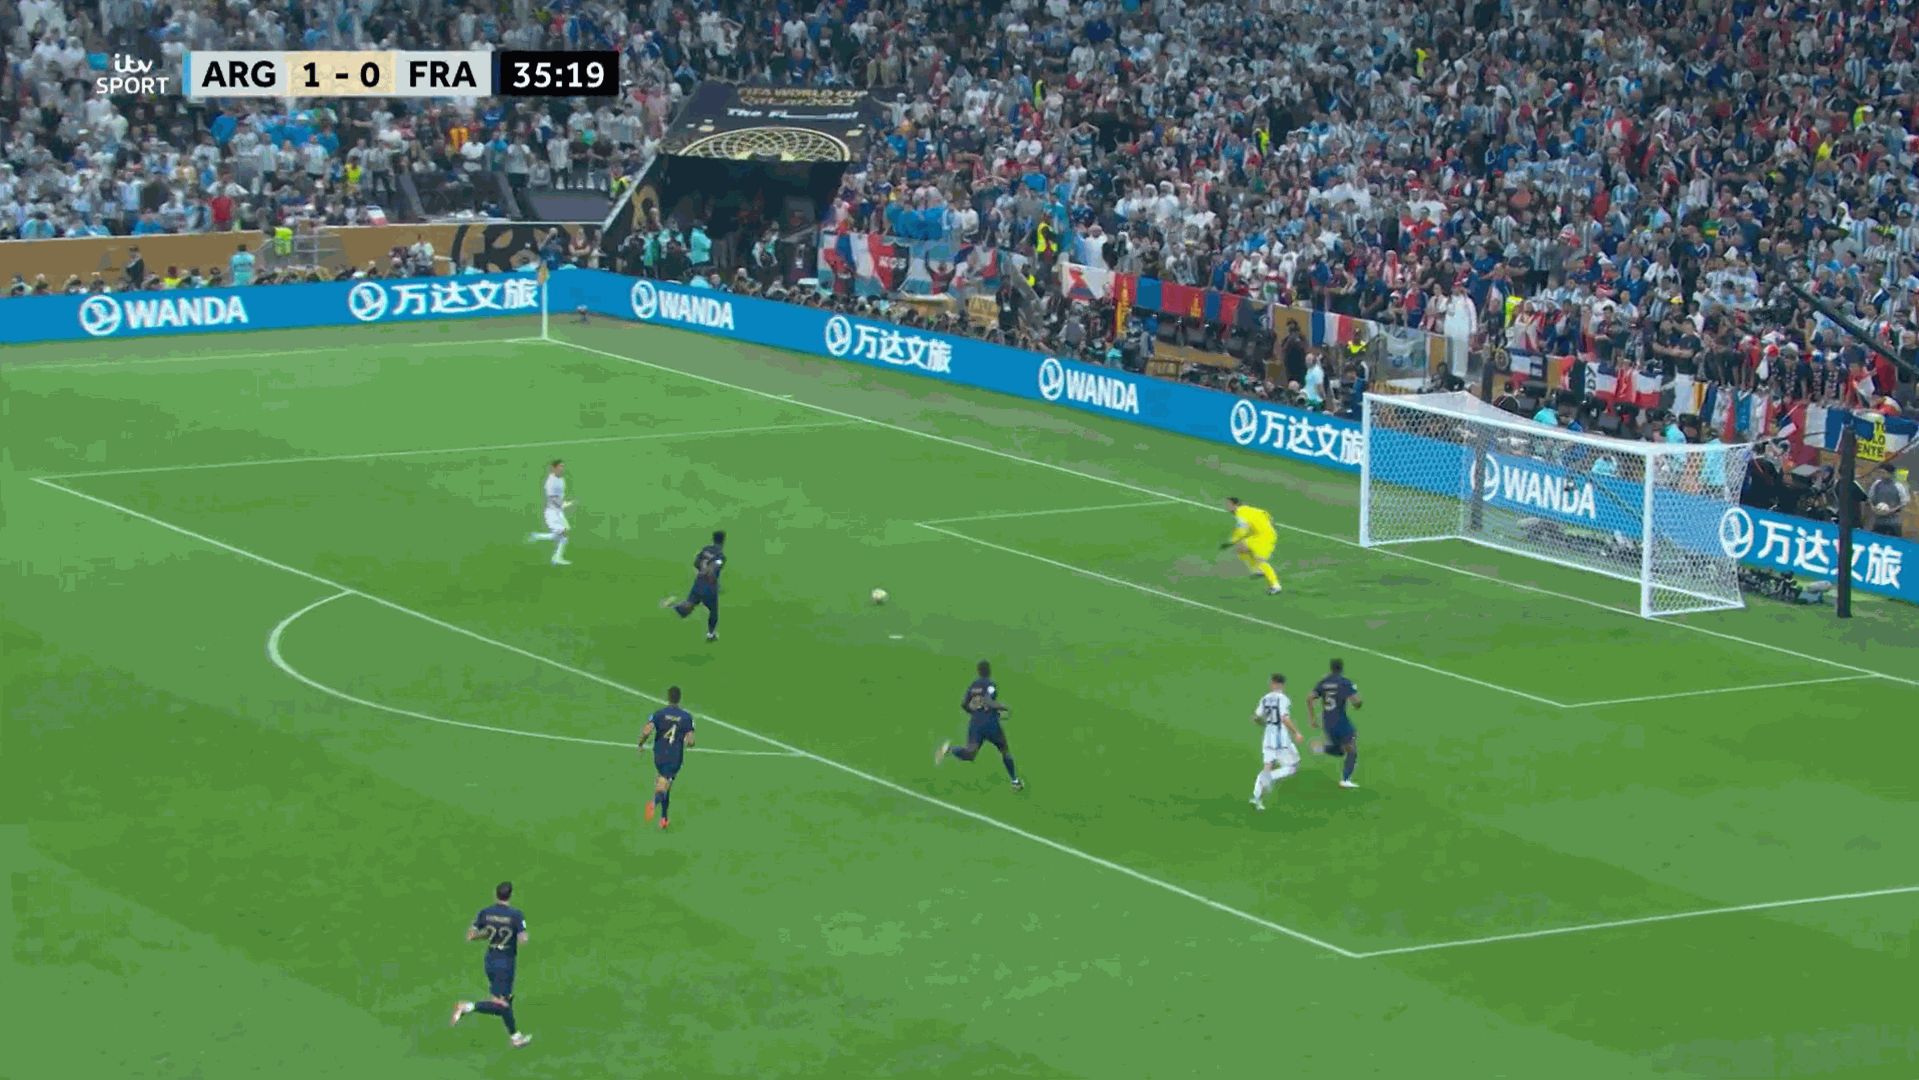 WATCH: Angel Di Maria doubles Argentina’s lead in the World Cup final